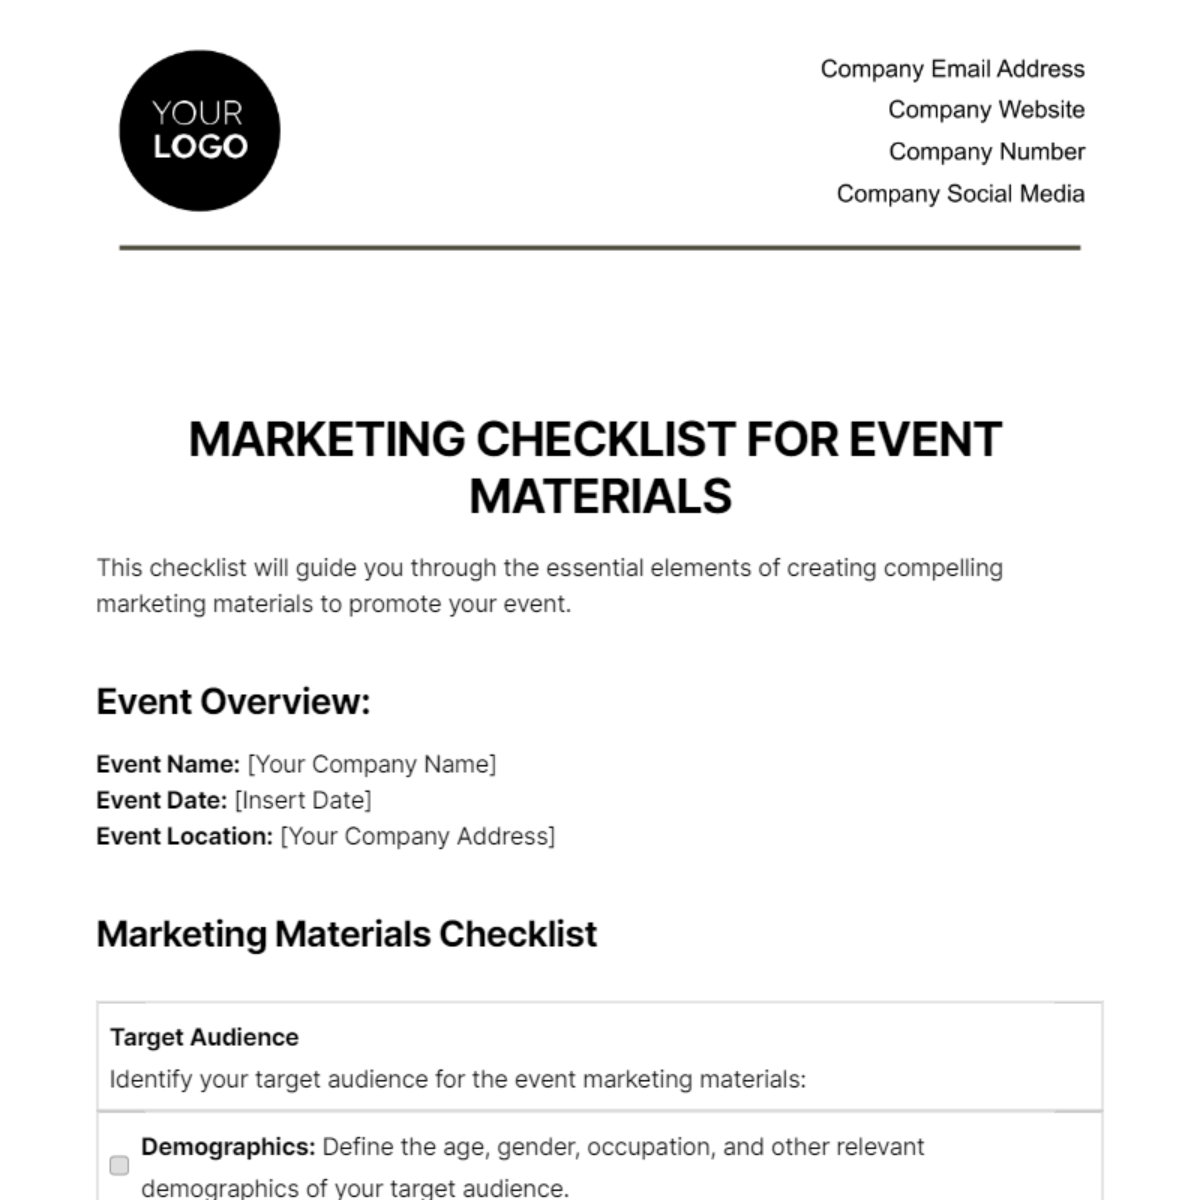 Marketing Checklist for Event Materials Template